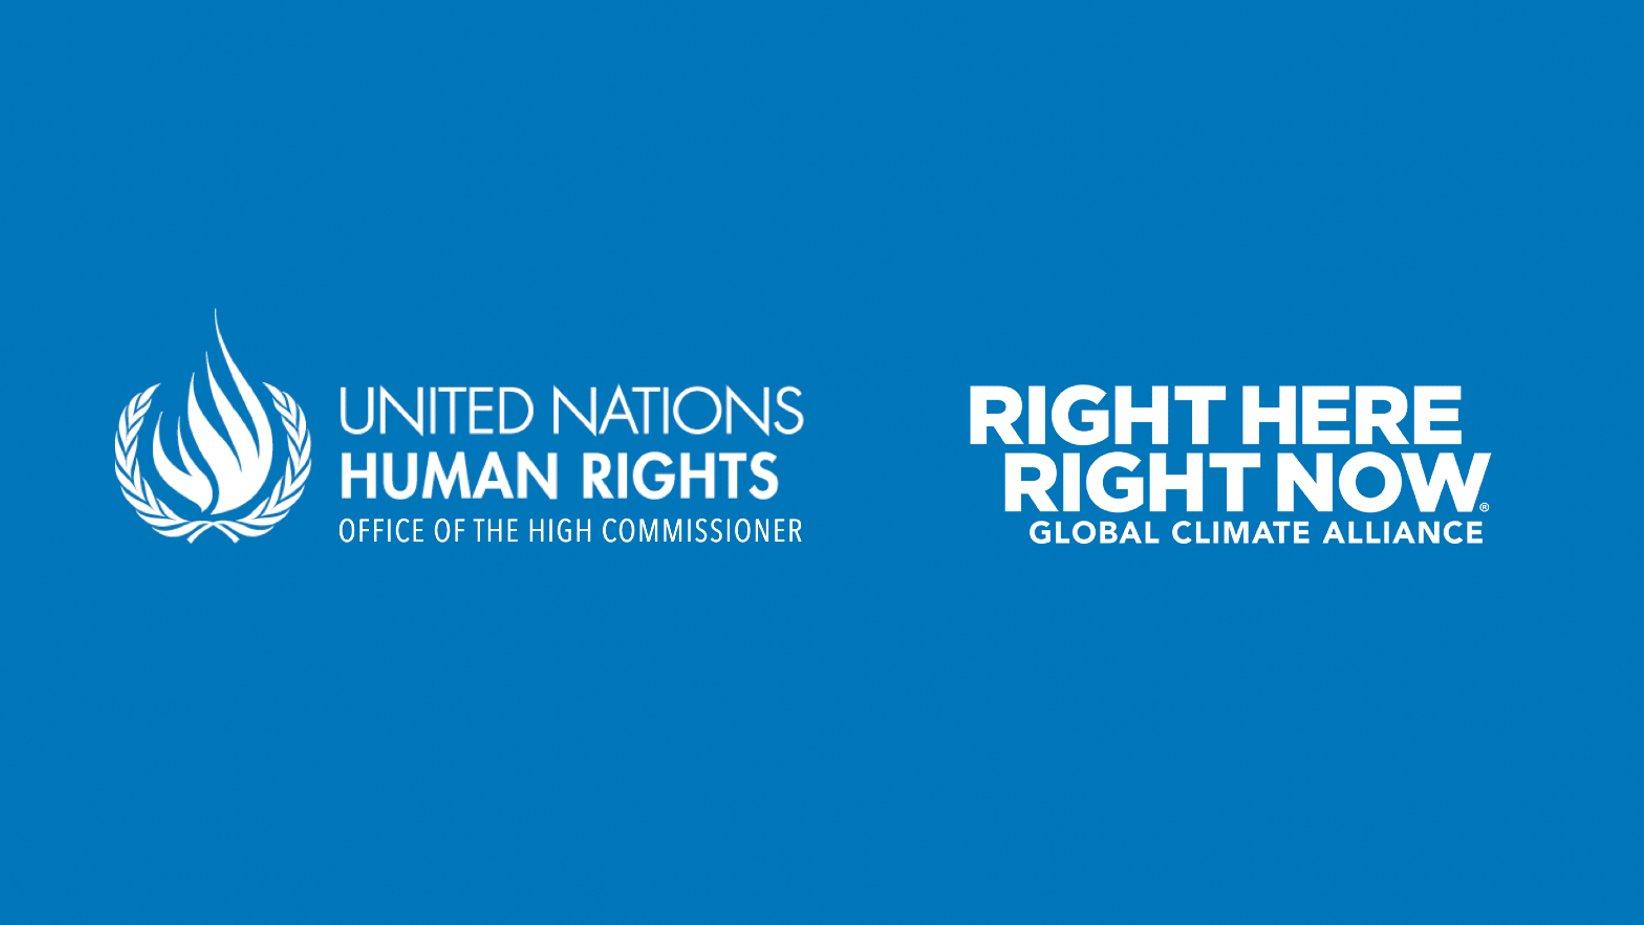 Graphic featuring artwork for the United Nations Human Rights campaign